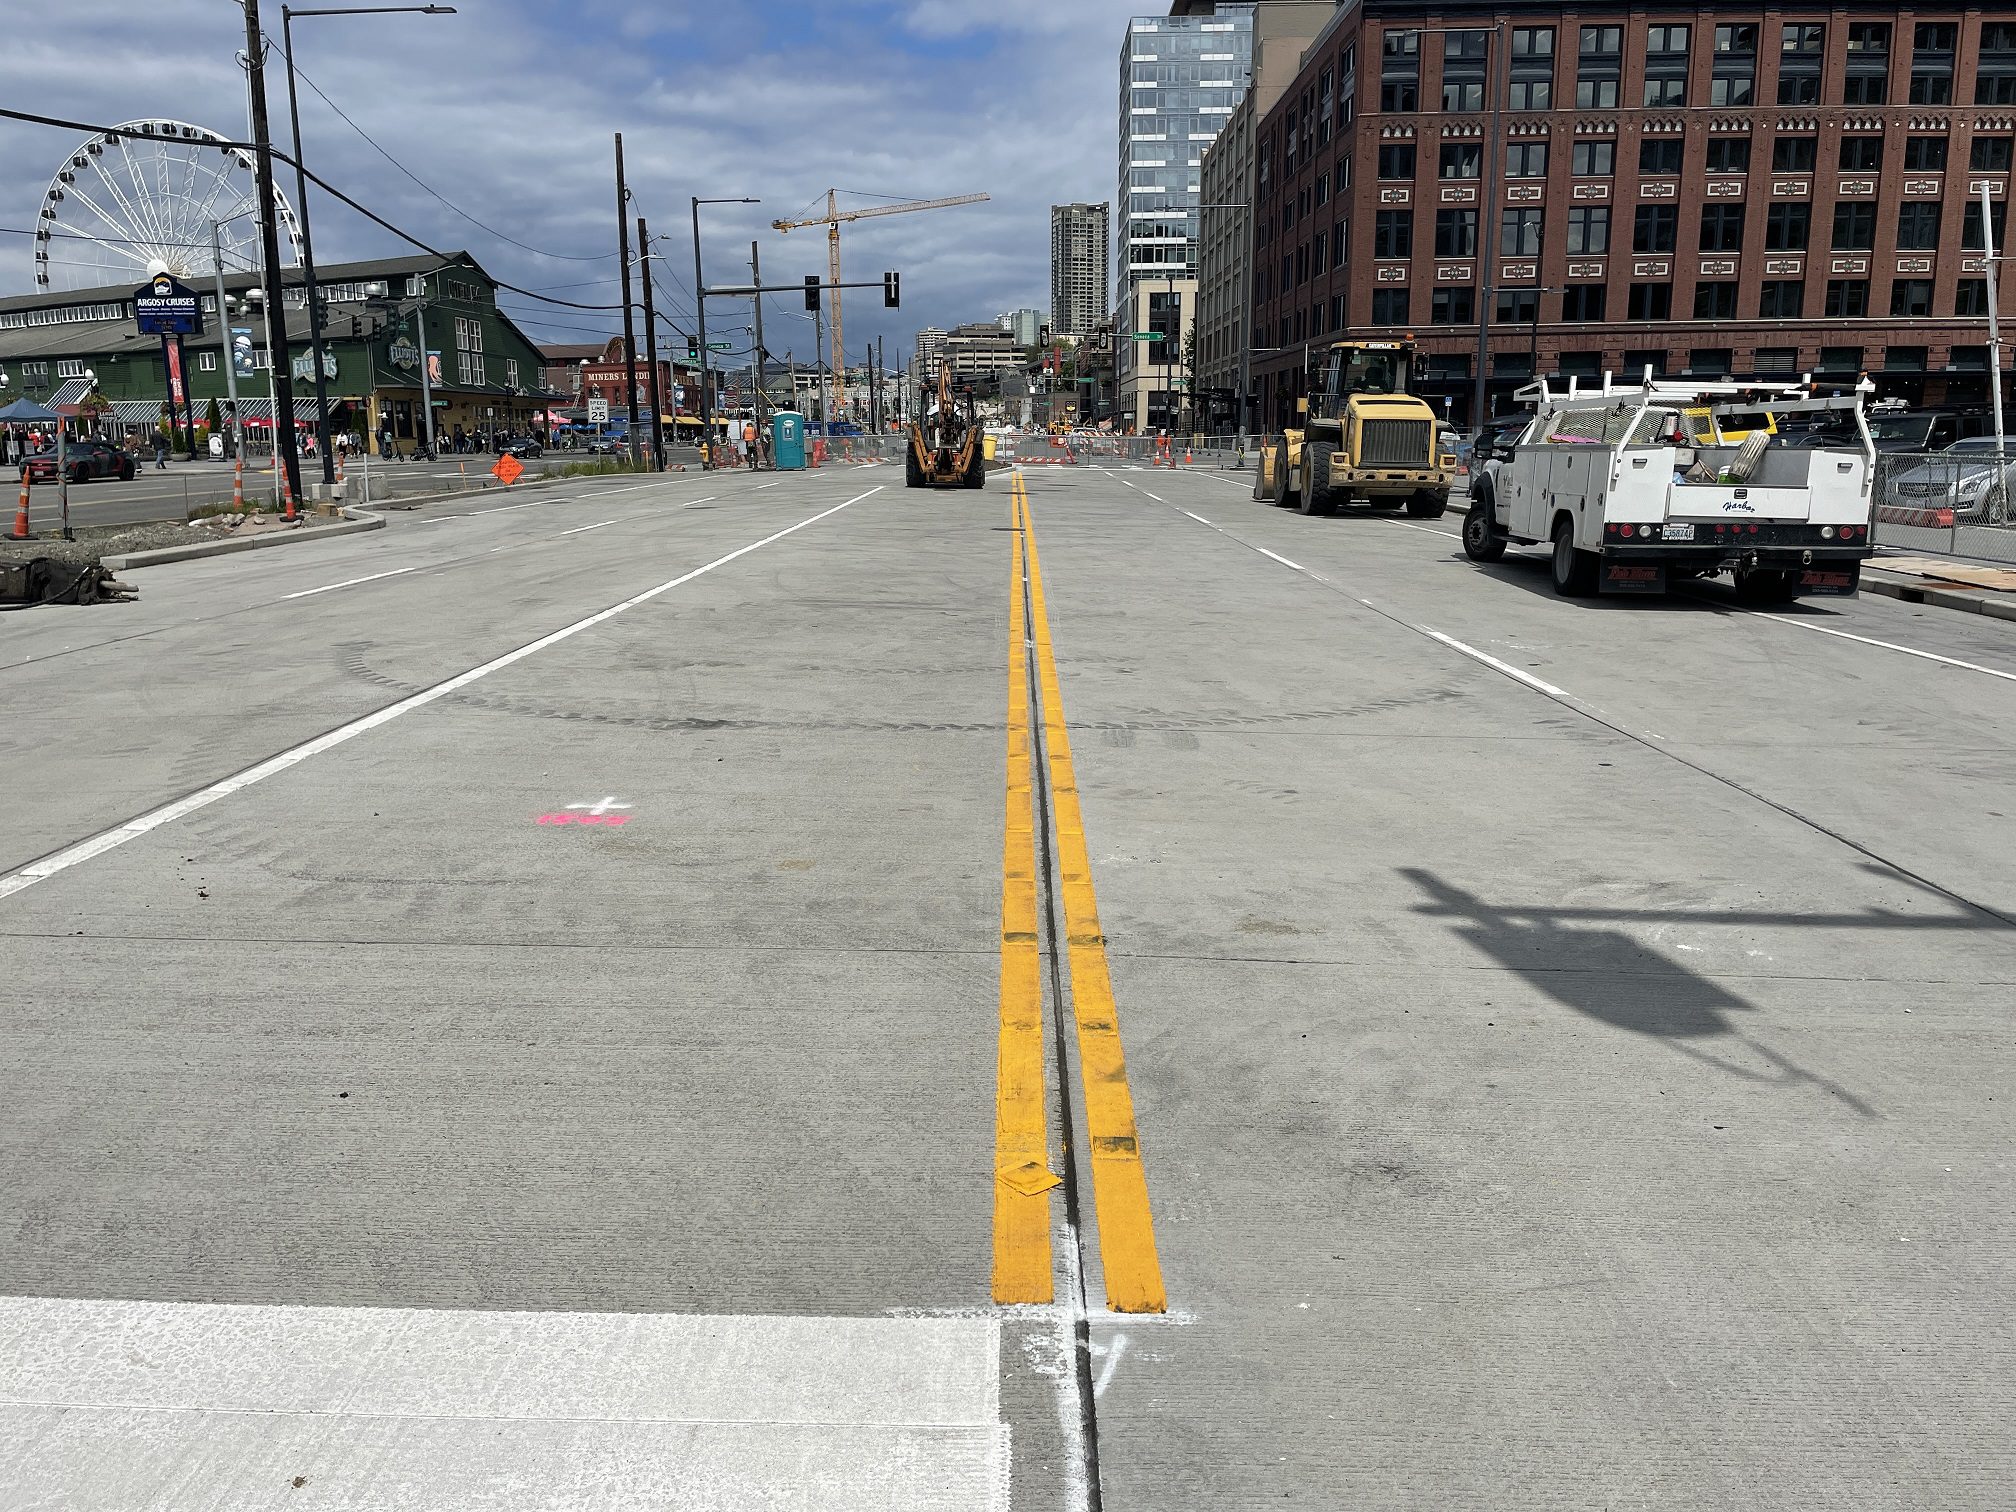 Lane markings on new travel lanes between Spring and Seneca streets in preparation to open five blocks of the newly constructed Alaskan Way. A double yellow line runs down the middle of the image, with work vehicles and large buildings in the background.